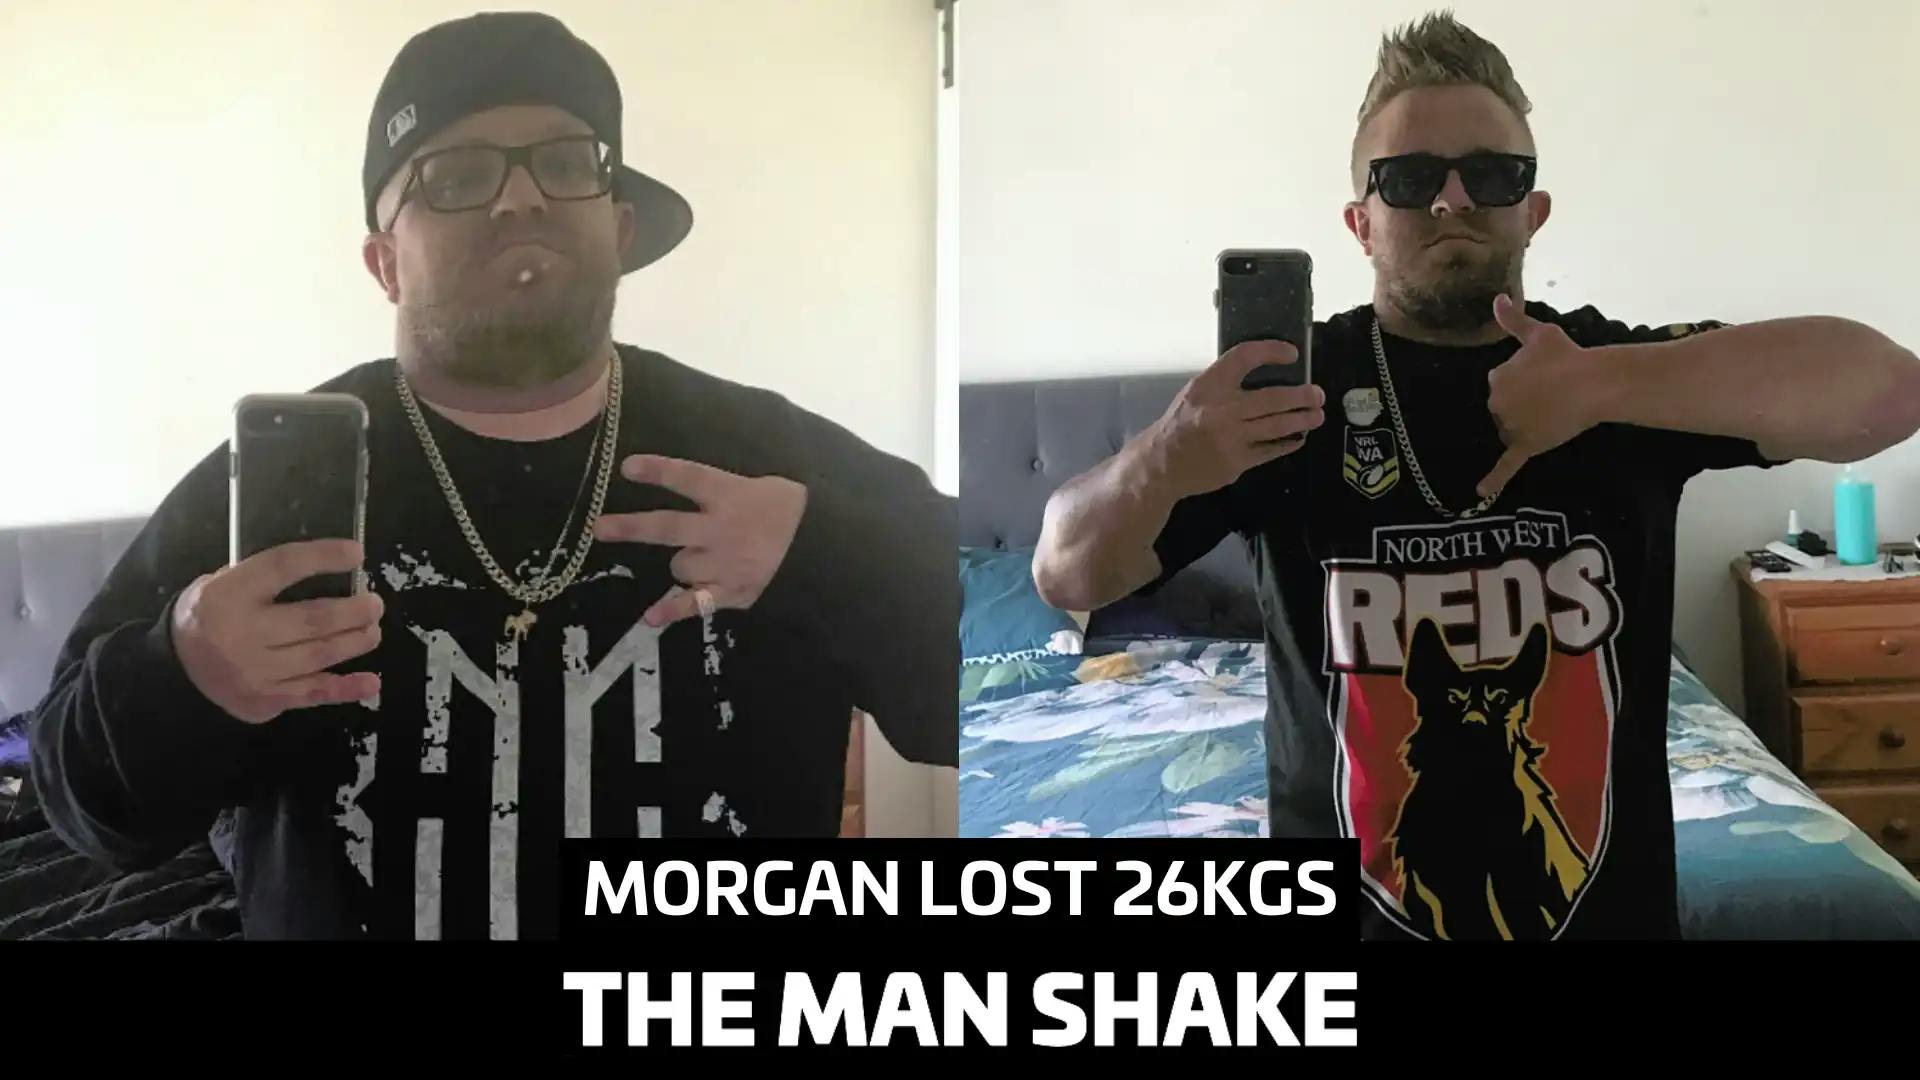 Morgan got his life back on track with his 26kg weight loss journey!